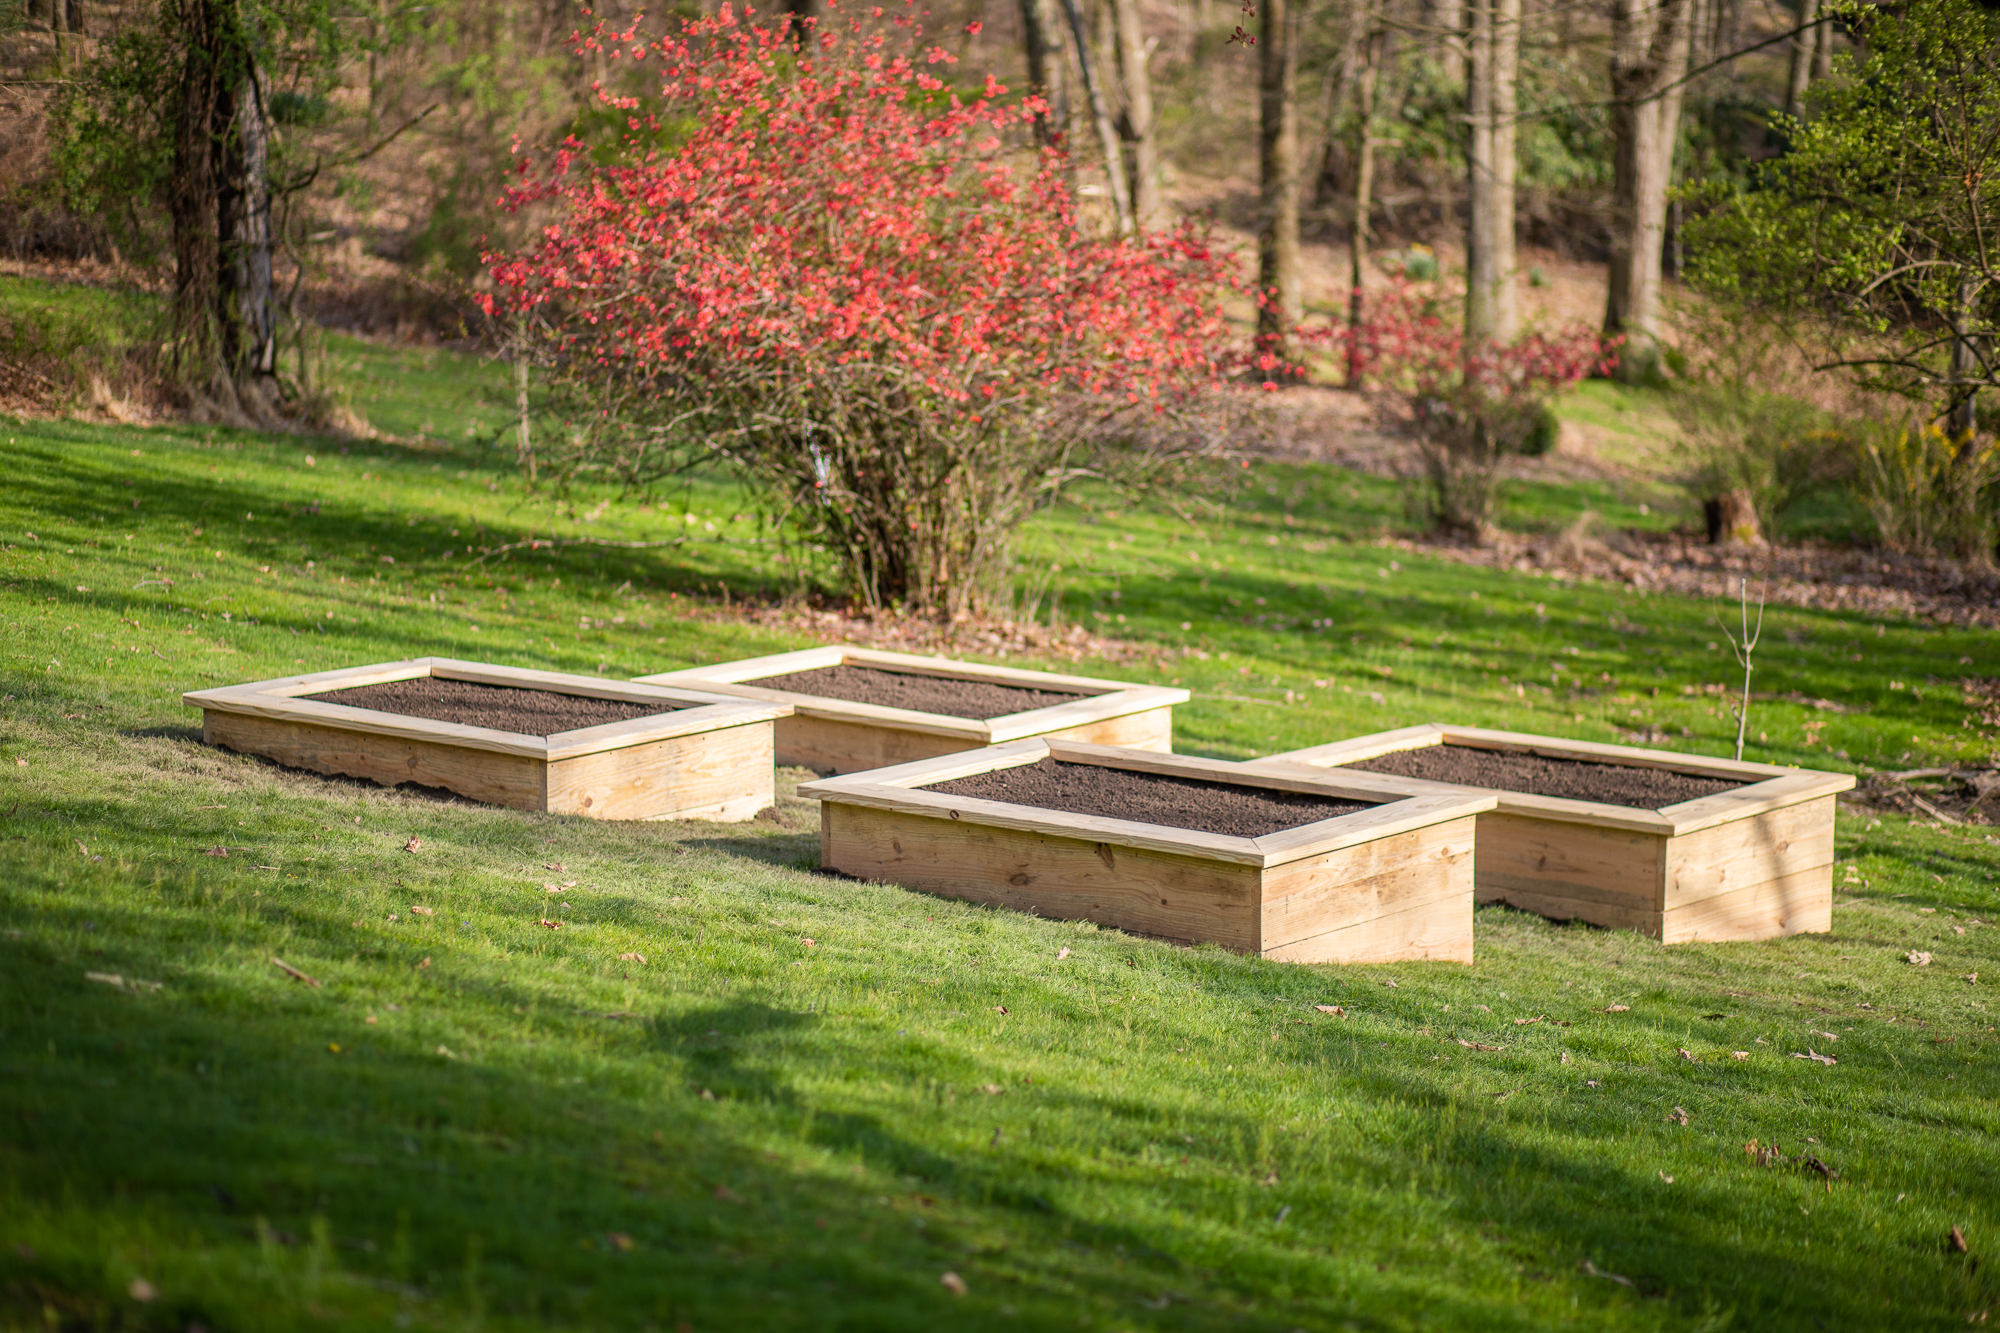 How to Build Raised Garden Beds (on a slope!)